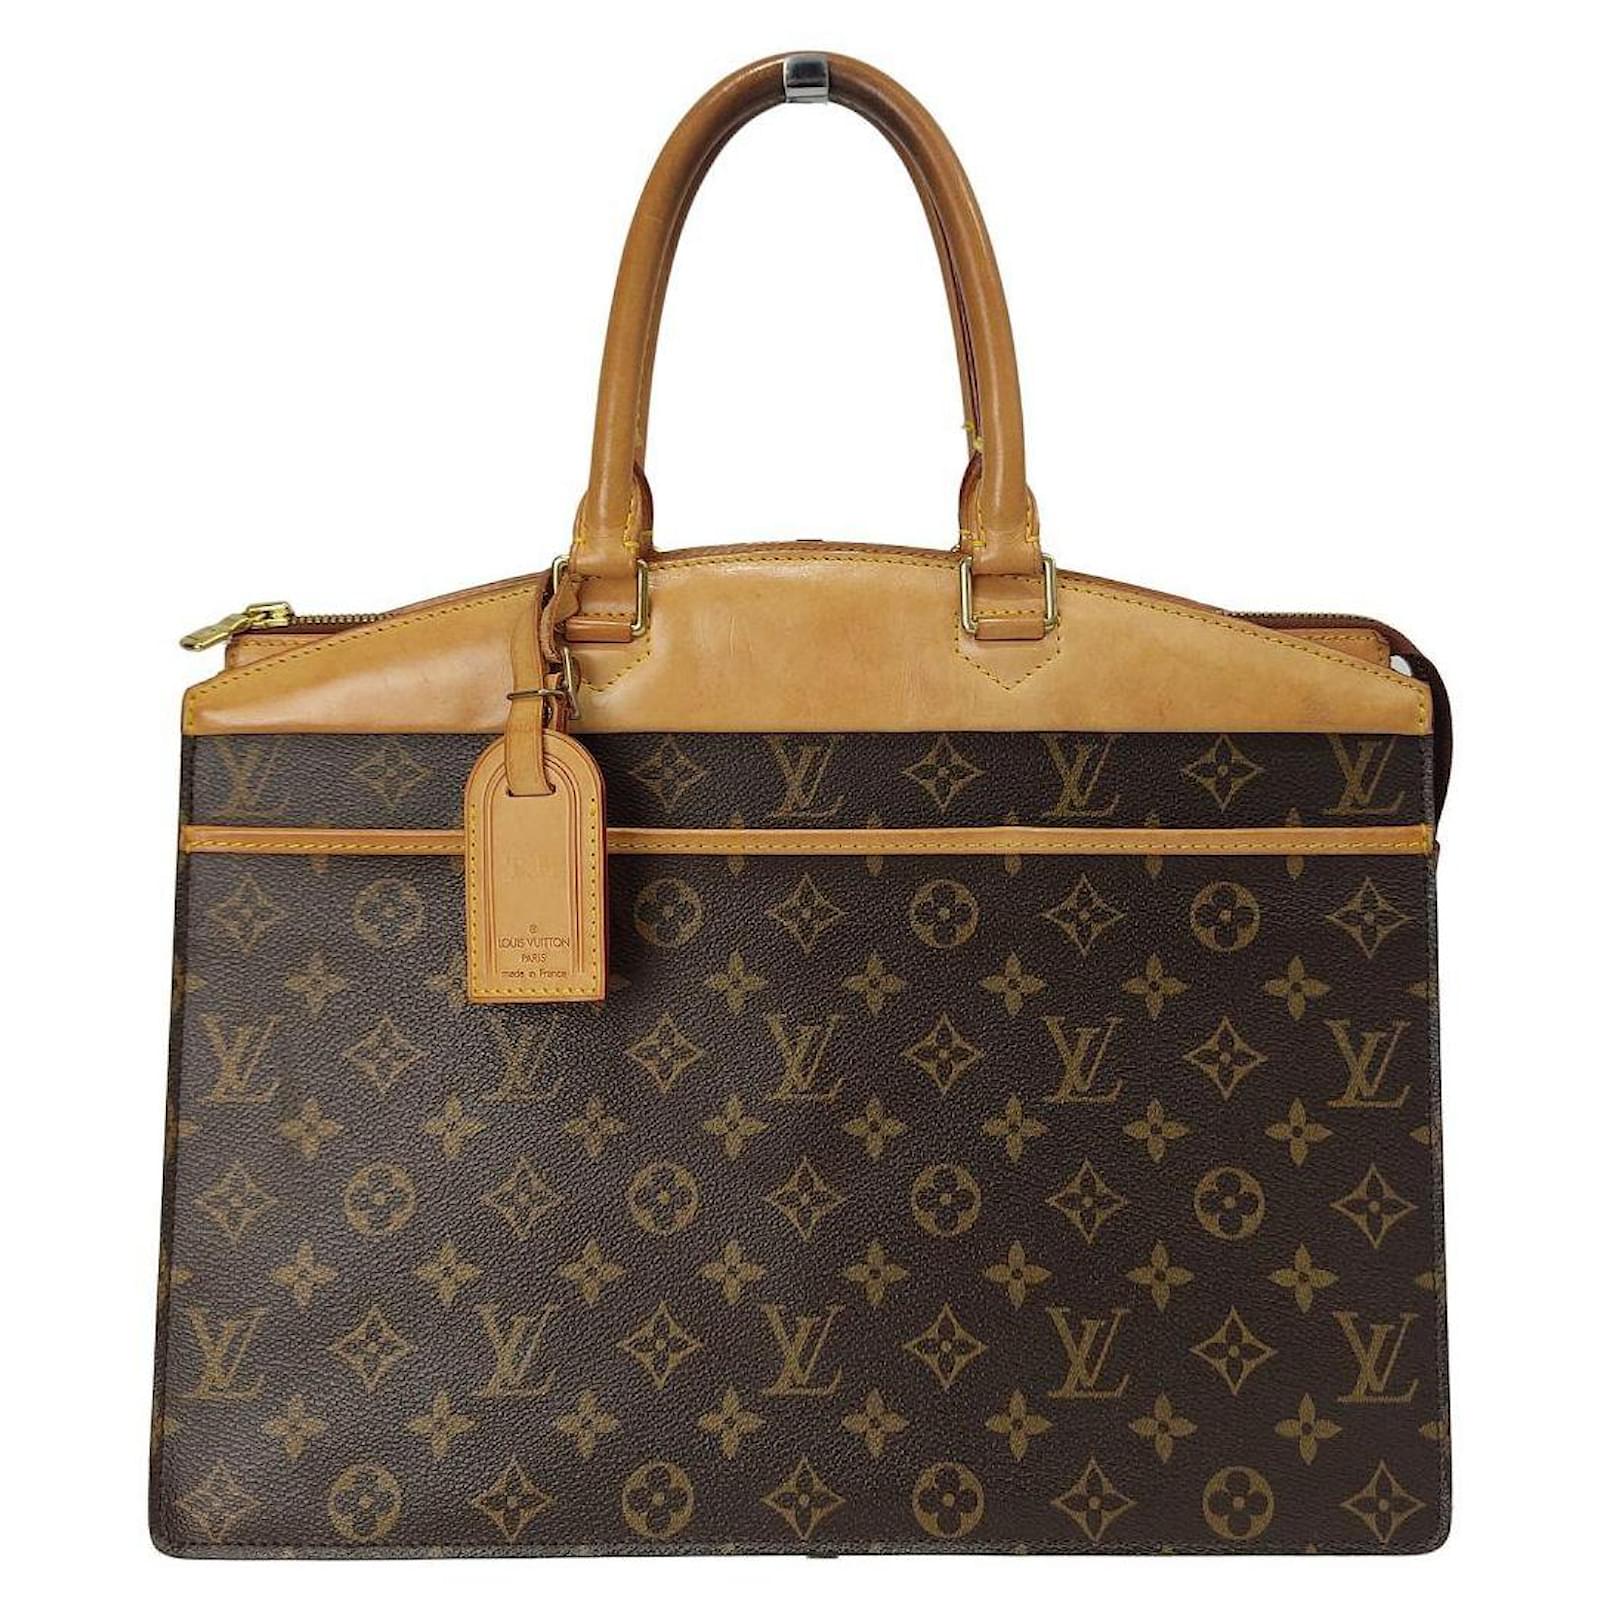 Pre-Owned Louis Vuitton Highbury Tote Bag - Good Condition 